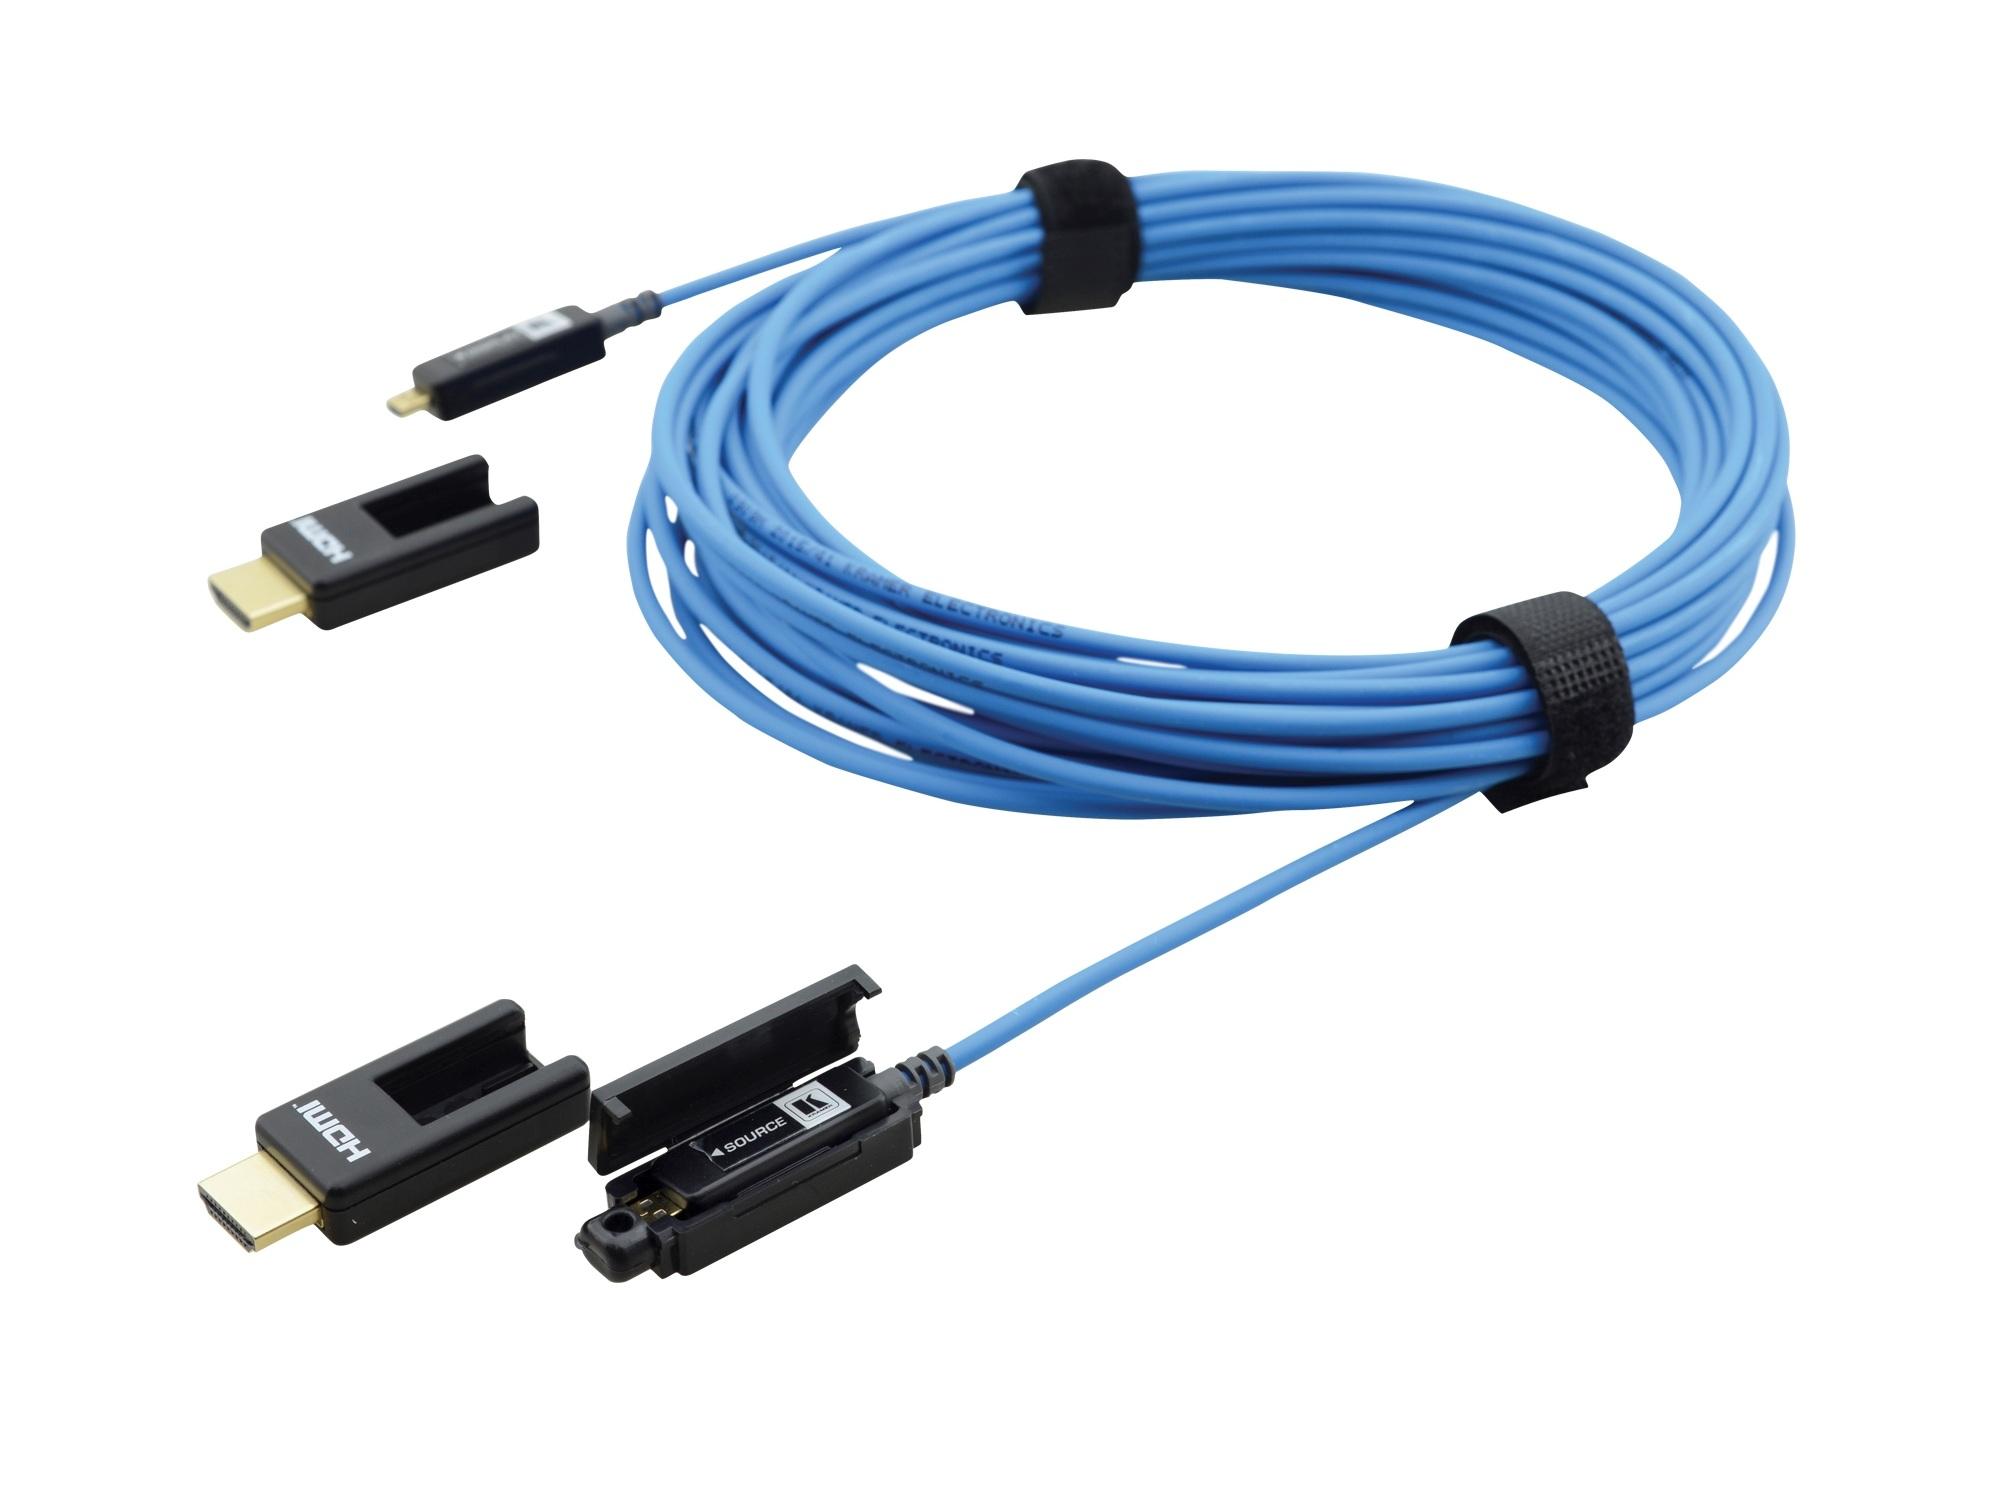 CP-AOCH/XL-197 Fiber Optic High-Speed Pluggable HDMI Cable - 197ft by Kramer